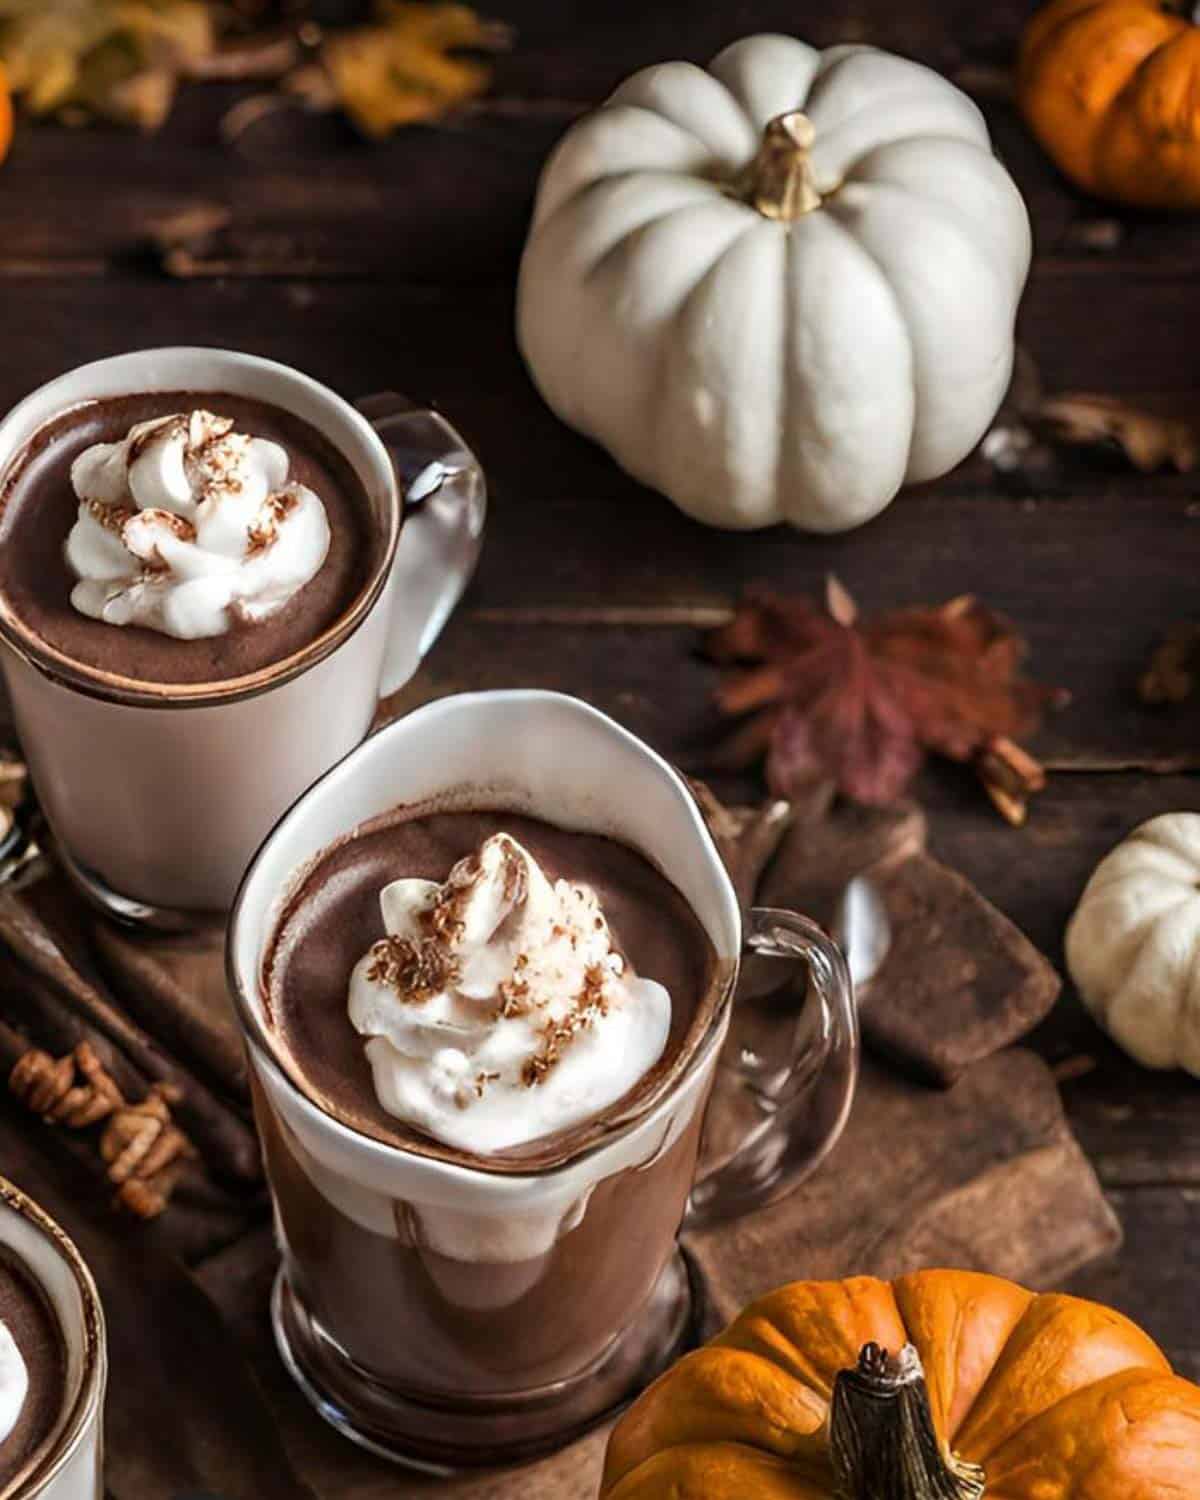 Three mugs of hot chocolate with coconut whipped cream.